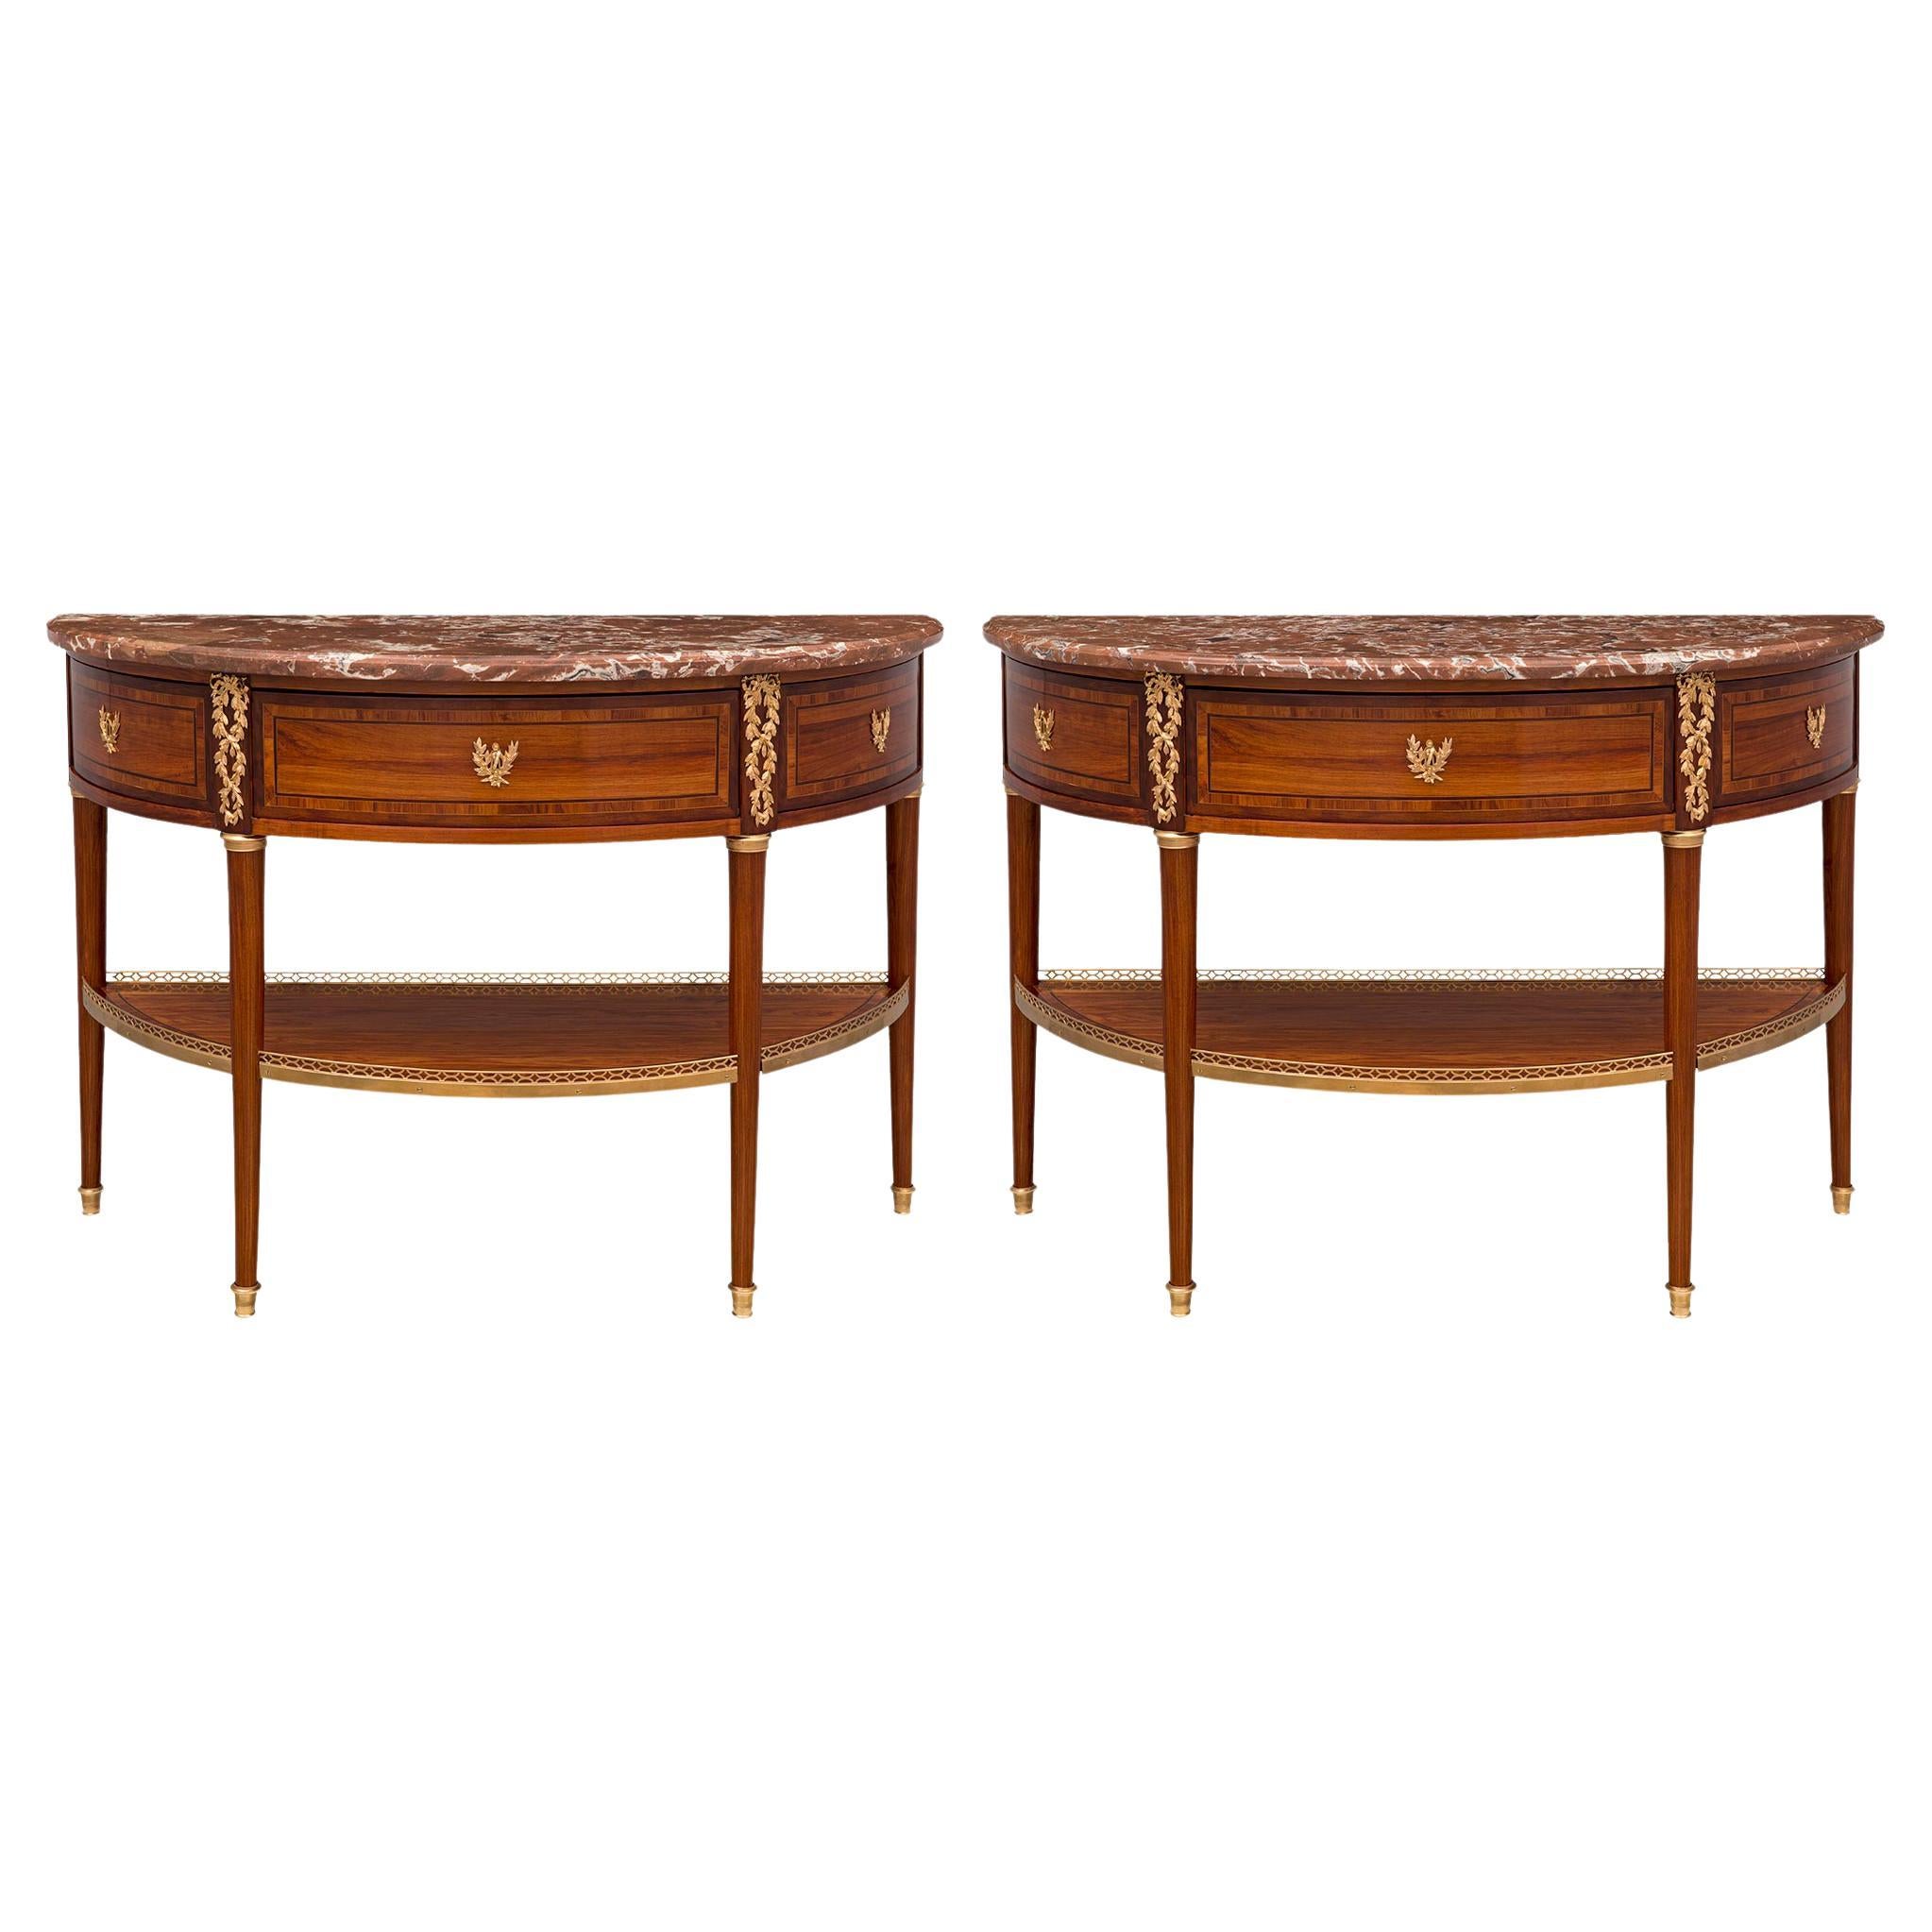 Pair of French 18th Century Louis XVI Period Console Tables